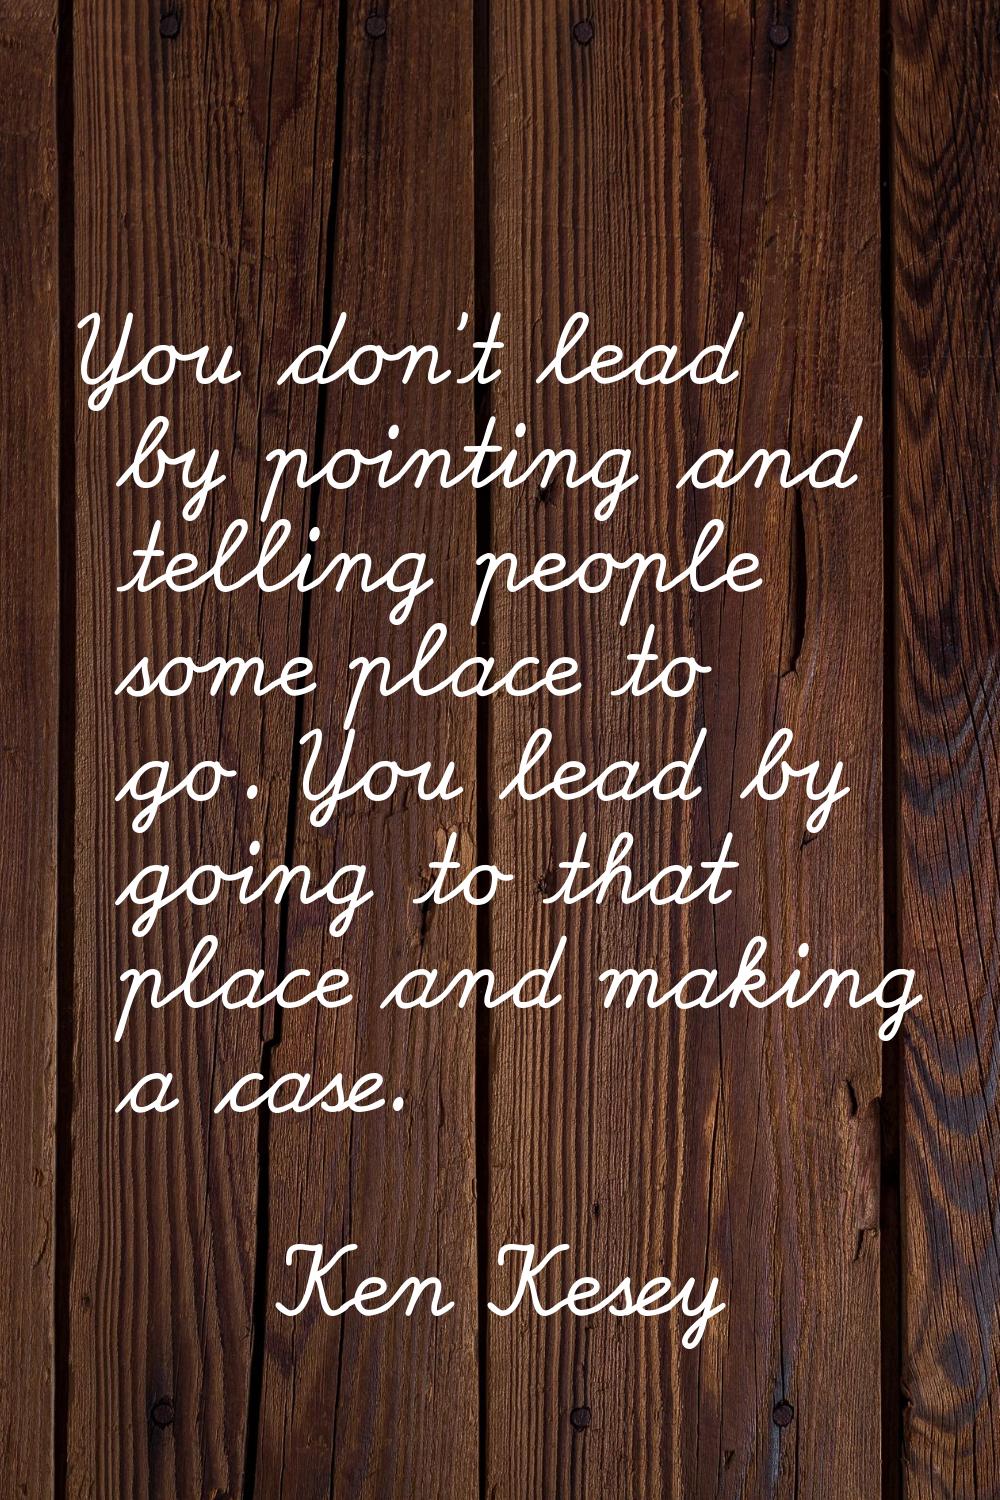 You don't lead by pointing and telling people some place to go. You lead by going to that place and